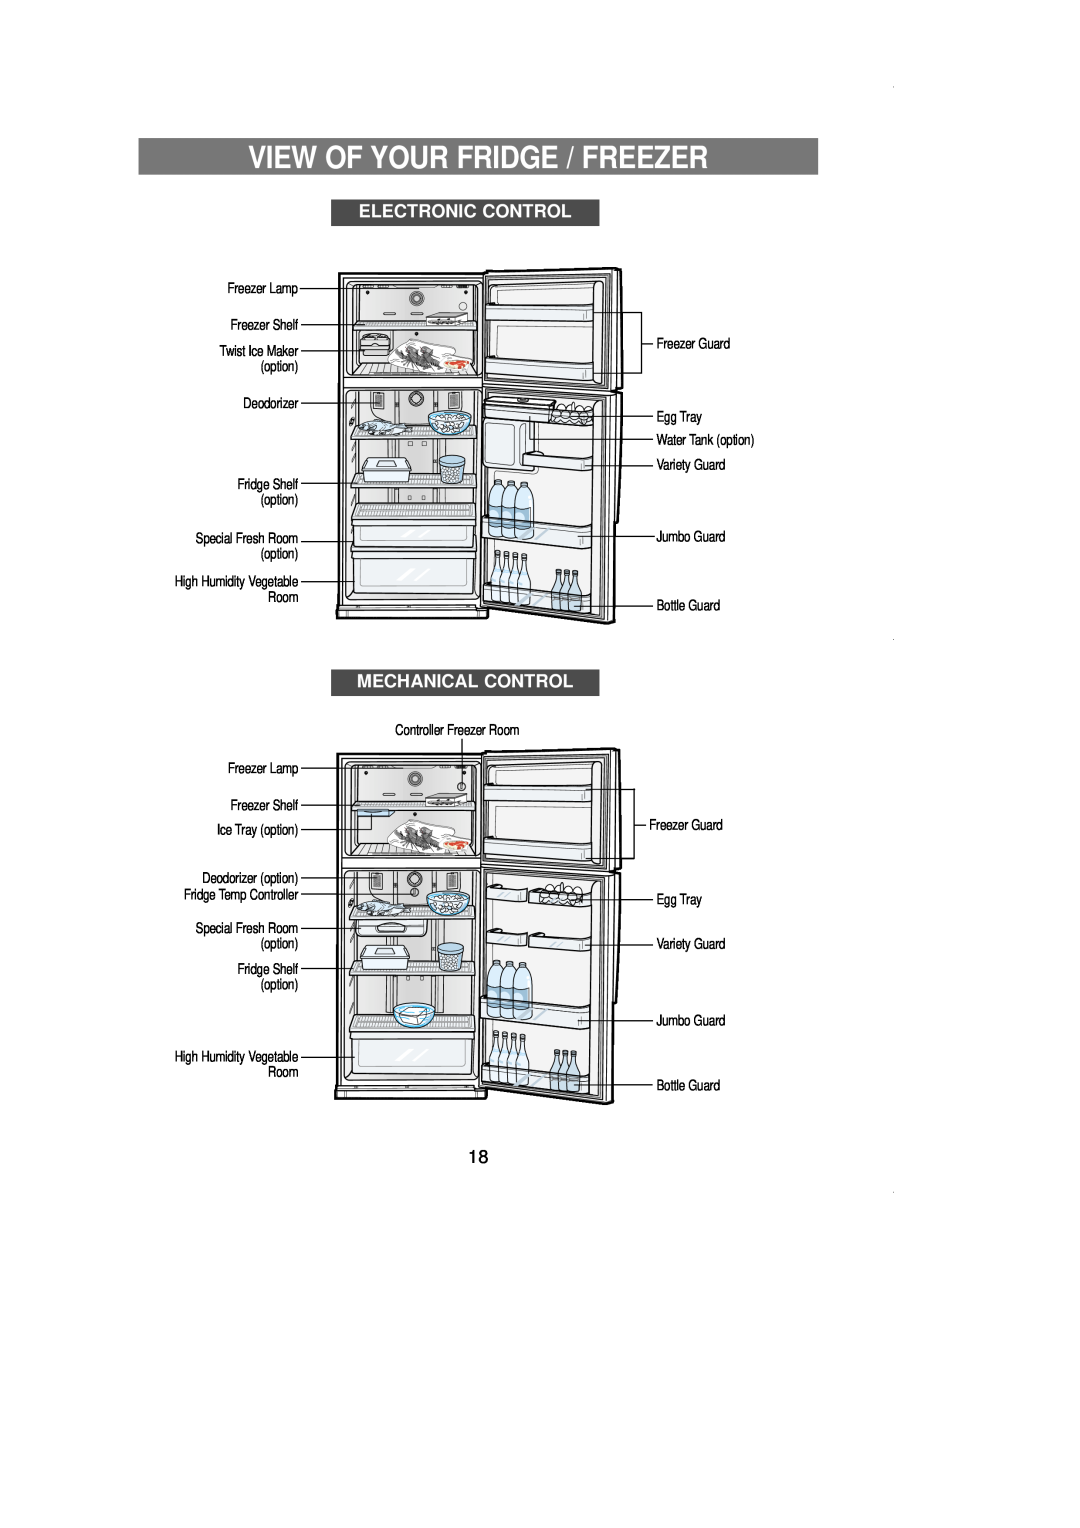 Samsung SR519DP owner manual View Of Your Fridge / Freezer, Electronic Control, Mechanical Control 